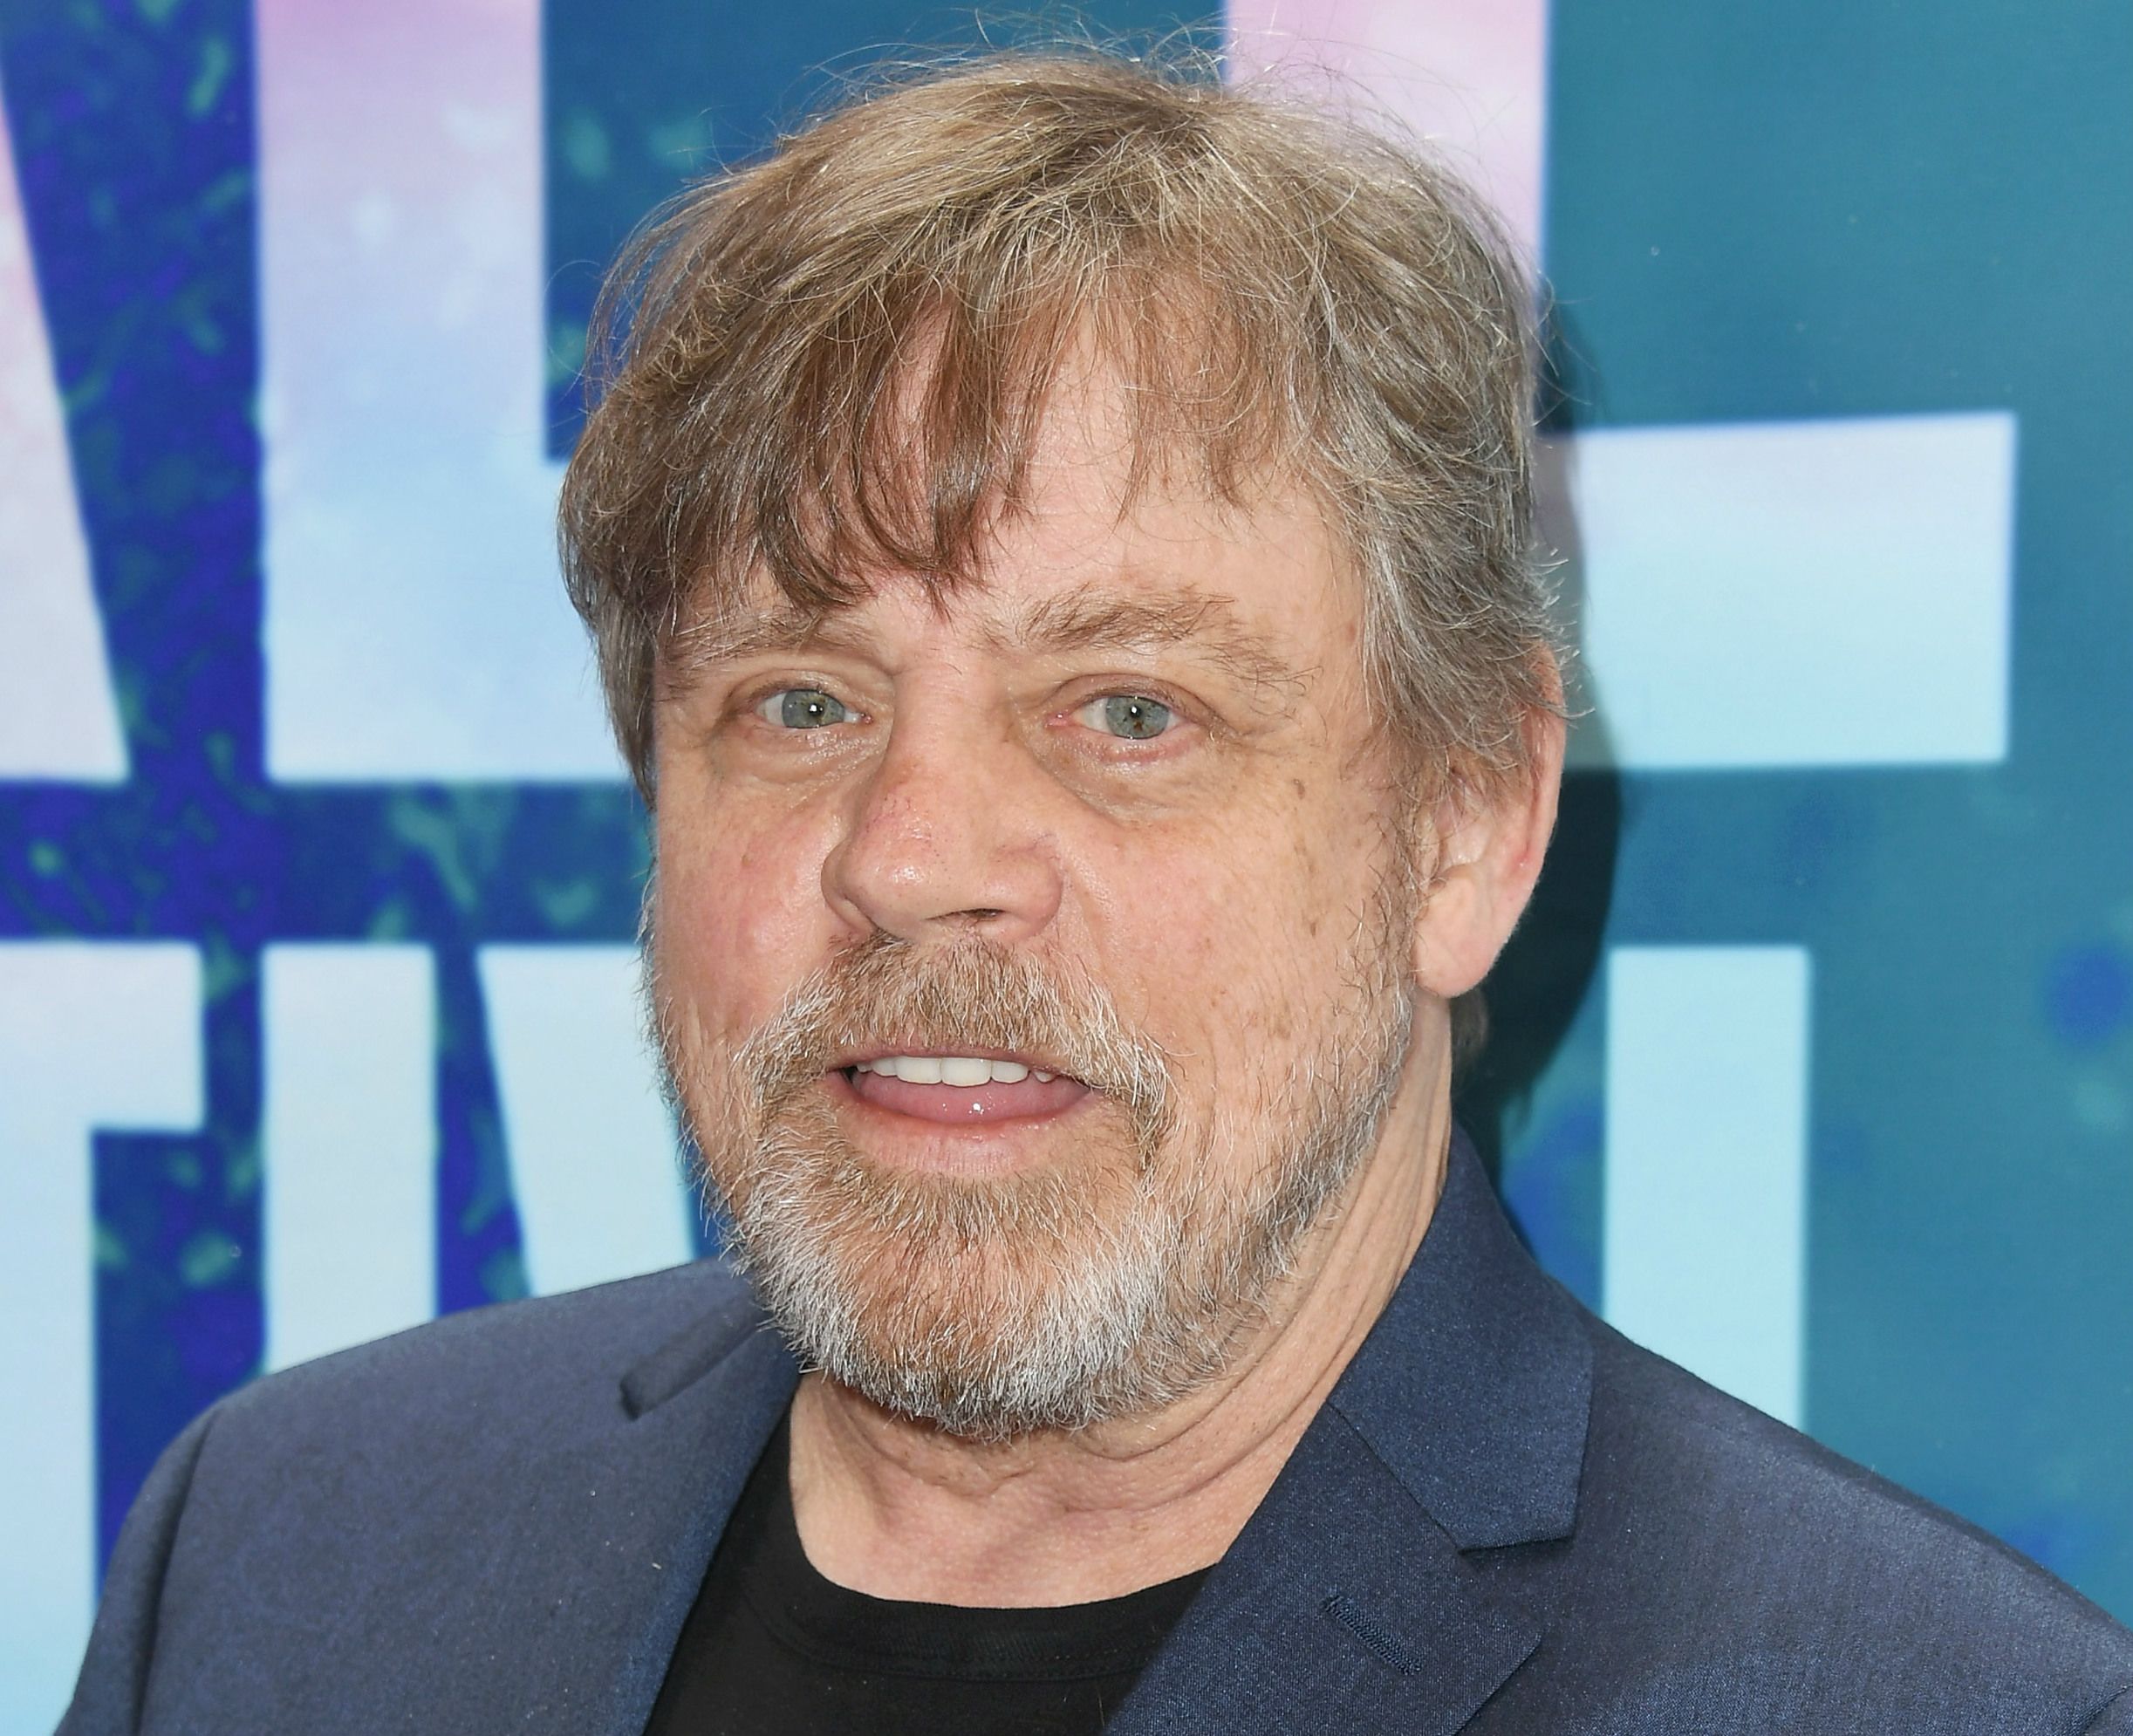 Mark Hamill List of Movies and TV Shows - TV Guide